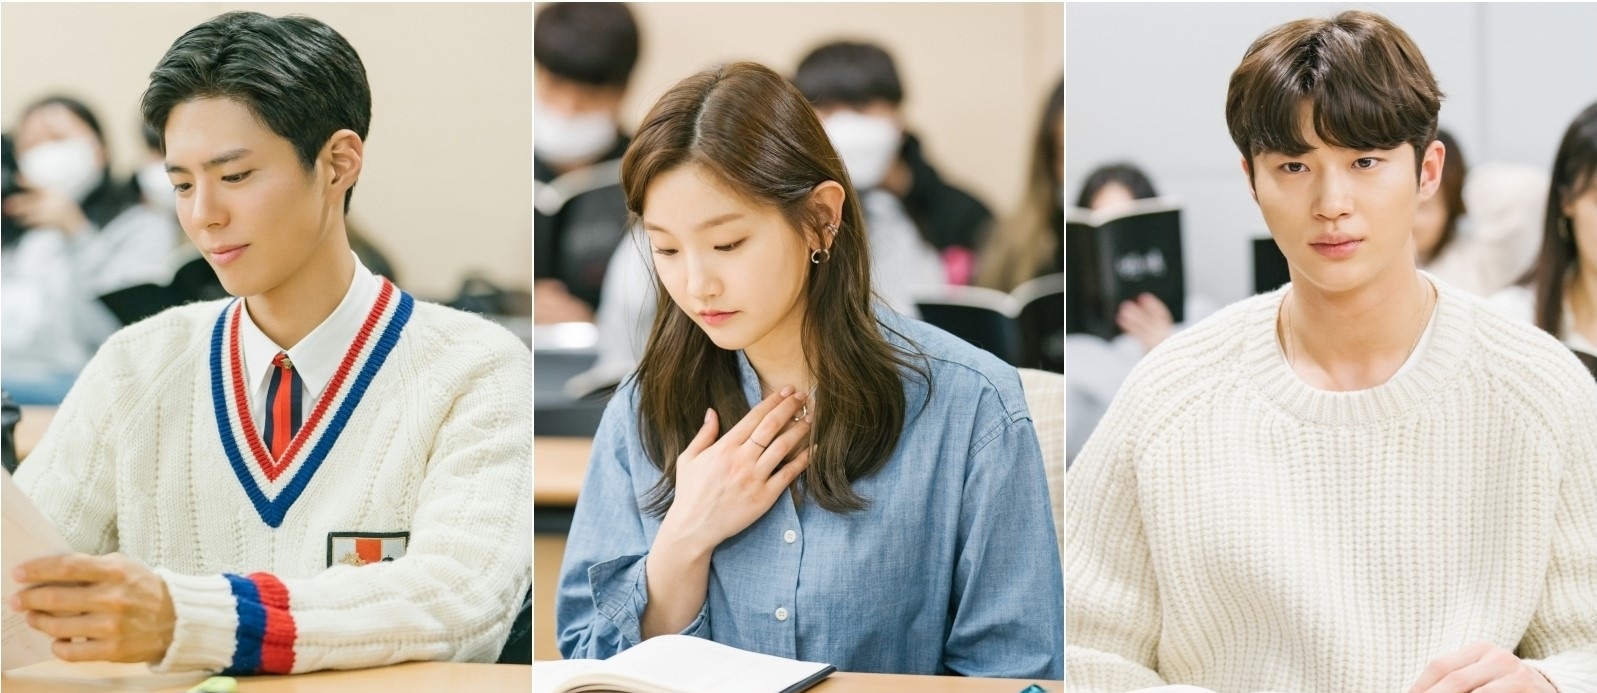 The Youth Record has unveiled the first script reading scene that emits the synergy of youth that is brilliantly excited.TVNs new Mon-Tue drama Youth Record, which is scheduled to be broadcasted in September, draws a growth record of young people who try to achieve dreams and love without despairing on the wall of reality.The hot record of those who go straight to their dreams in their own way, the youth of this era, which has become a luxury even to dream, gives excitement and sympathy.The meeting of syndrome maker, which guarantees perfection, also ignites expectations.Director Ahn Gil-ho, who showed the power of detailed and delicate directing through Secret Forest, Memories of Alhambra Palace, and WATCHER, and writer Ha Myung-hee, who melts realistic eyes to warm and emotional stories such as Doctors and Love Temperature,The script reading was directed by Ahn Gil-ho and Ha Myung-hee, Park Bo-gum, Park So-dam, Byeon Wooseok, Ha Hee-ra, Shin Ae-ra, Han Jin-hee, Park Soo-young, Seo Sang Won, Shin Dong-mi, Lee Chang-hoon, Lee Jae-won, Veteran Acting high school students and popular youth actors who give confidence even if they hear names such as hun, yu-Jeong, etc.Prior to the full-scale start, director Ahn Gil-ho said, I started to give good influence. I hope that I can give a sound through the growth of youth.Sa Hye-joons straight-up figure, which runs fiercely to achieve his dream of becoming an actor, combines with Park Bo-gums unique positive energy and adds charm.Park Bo-gum said, I will work hard to make this youth beautifully recorded and remembered at this time that will not come back now like the title of Youth Record.Park So-dam showed a transformation of breaking down Acting as a stabilized youth who goes straight to his dream.The makeup artist with the skill of Manleb in social life has unleashed the charm of An Jeong-ha.When I am tired and tired, I am a fan of Sa Hye-joon who is comforted by morality and emits lovely energy and gives a pleasant smile.Above all, the breath of Park Bo-gum and Park So-dam, which had been expected, was perfect.It is a detailed expression of the emotions that change toward each other and raised the index of excitement.The meeting between fan and honey, and how the two people with this special relationship will transform themselves already stimulate expectations.The rising youth star Byeon Wooseok took on the role of Won Hae Hyo, a youth who wanted to be recognized for his efforts, and raised the tension.Won Hae Hyo is a person who can not bear the gaze that he will benefit from the family because he does his best if he likes it.Byeon Wooseok, who showed the character and perfect synchro rate as a model, doubled the charm of the character by drawing a three-dimensional picture of Won Hae-hyo with a strong desire to evaluate a fair and fair evaluation from a warm and gentle appearance.In particular, the chemistry with the special Friend Park Bo-gum, which has developed the same dream, warms the viewers and raises expectations for the romance that the two will show.Han Jin-hee, who conveyed his impression that he would watch the pain of youth, took the center of gravity of the disassembly drama with Sa Hye-joons grandfather.Especially, the warm synergy of Park Bo-gum and Han Jin-hee, who met as grandchildren and grandfathers who are strong for each other, will attract viewers.Here, Park Soo-young of Sae Hye-joons father, Sae Young-nam, and Seo Sang-won of Won Tae-kyung, the father of Won Hae-hyo, also added a heavy presence.There was also a feast of characters that would bring liveliness.Shin Dong-mi, a manager who burns his passion to make Sa Hye-joon an actor, caused a laugh with a sultry act.Lee Chang-hoon, who added immersion with detailed acting, took on Lee Tae-soo, the model agency representative who filled his self-interest.Lee Jae-won, Sa Hye-joons brother, Sa Hye-joon, and Kwon Soo-hyun, who is divided into Friend of Sa Hye-joon and Won Hae-hyo and Kim Jin-woo, who dreams of becoming a photographer, and Joe-Jeong, who plays the elite Won Hae-na,In addition, actors who do not need explanations such as Jung Min-sung, Yang So-min, Jo Ji-seung, Lim Ki-hong, Park Se-hyun, and Jang I-jung were immersed in their characters and laughed and rang the crowd.The production team of Youth Record said, It was a time when I could not take my eyes off for a moment as the actors gathered to save the taste of the character.The synergy of the actors on the delicate script was by far the most outstanding. It is a work that realistically melts the youths of this age who are trying to achieve dreams and love in those days that are brilliant to anyone.I will show a pleasant smile and a warm story that everyone can sympathize with. TVNs new Mon-Tue drama Youth Record is scheduled to be broadcast in September.